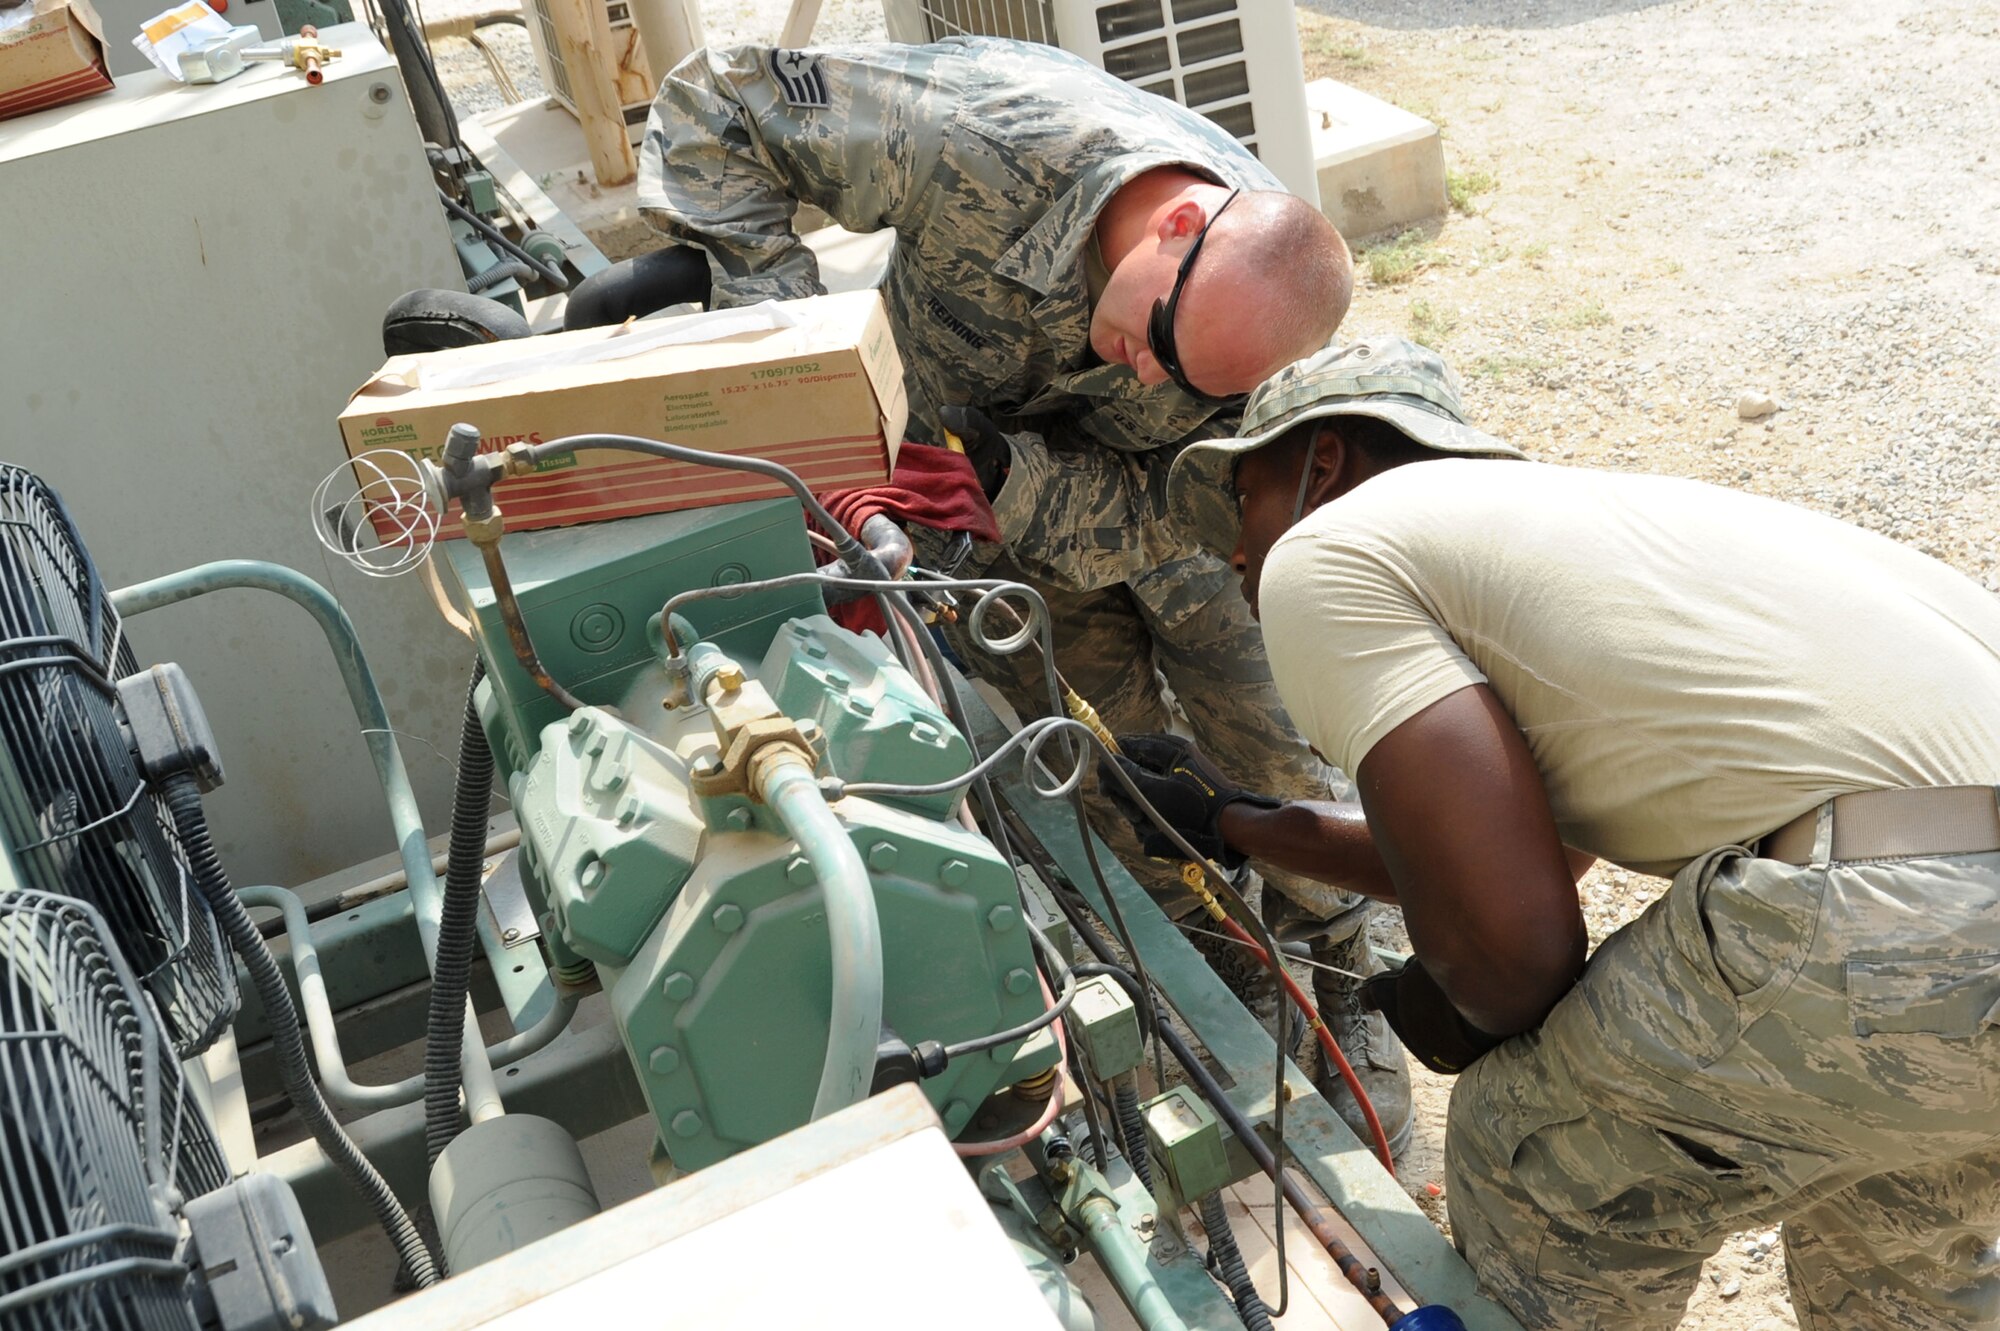 Staff Sgt. Corey Reining and Senior Airman Terrence Patton, 386th Expeditionary Civil Engineer Squadron heating, ventilation, and air conditioning technicians, perform maintenance on an A/C unit Sep. 2, 2016, at an undisclosed location in Southwest Asia. Due to extremely high temperatures, the 386 ECES HVAC shop must maintain the A/C units across the base more frequently to keep them at their optimal performance levels. (U.S. Air Force photo/Senior Airman Zachary Kee)